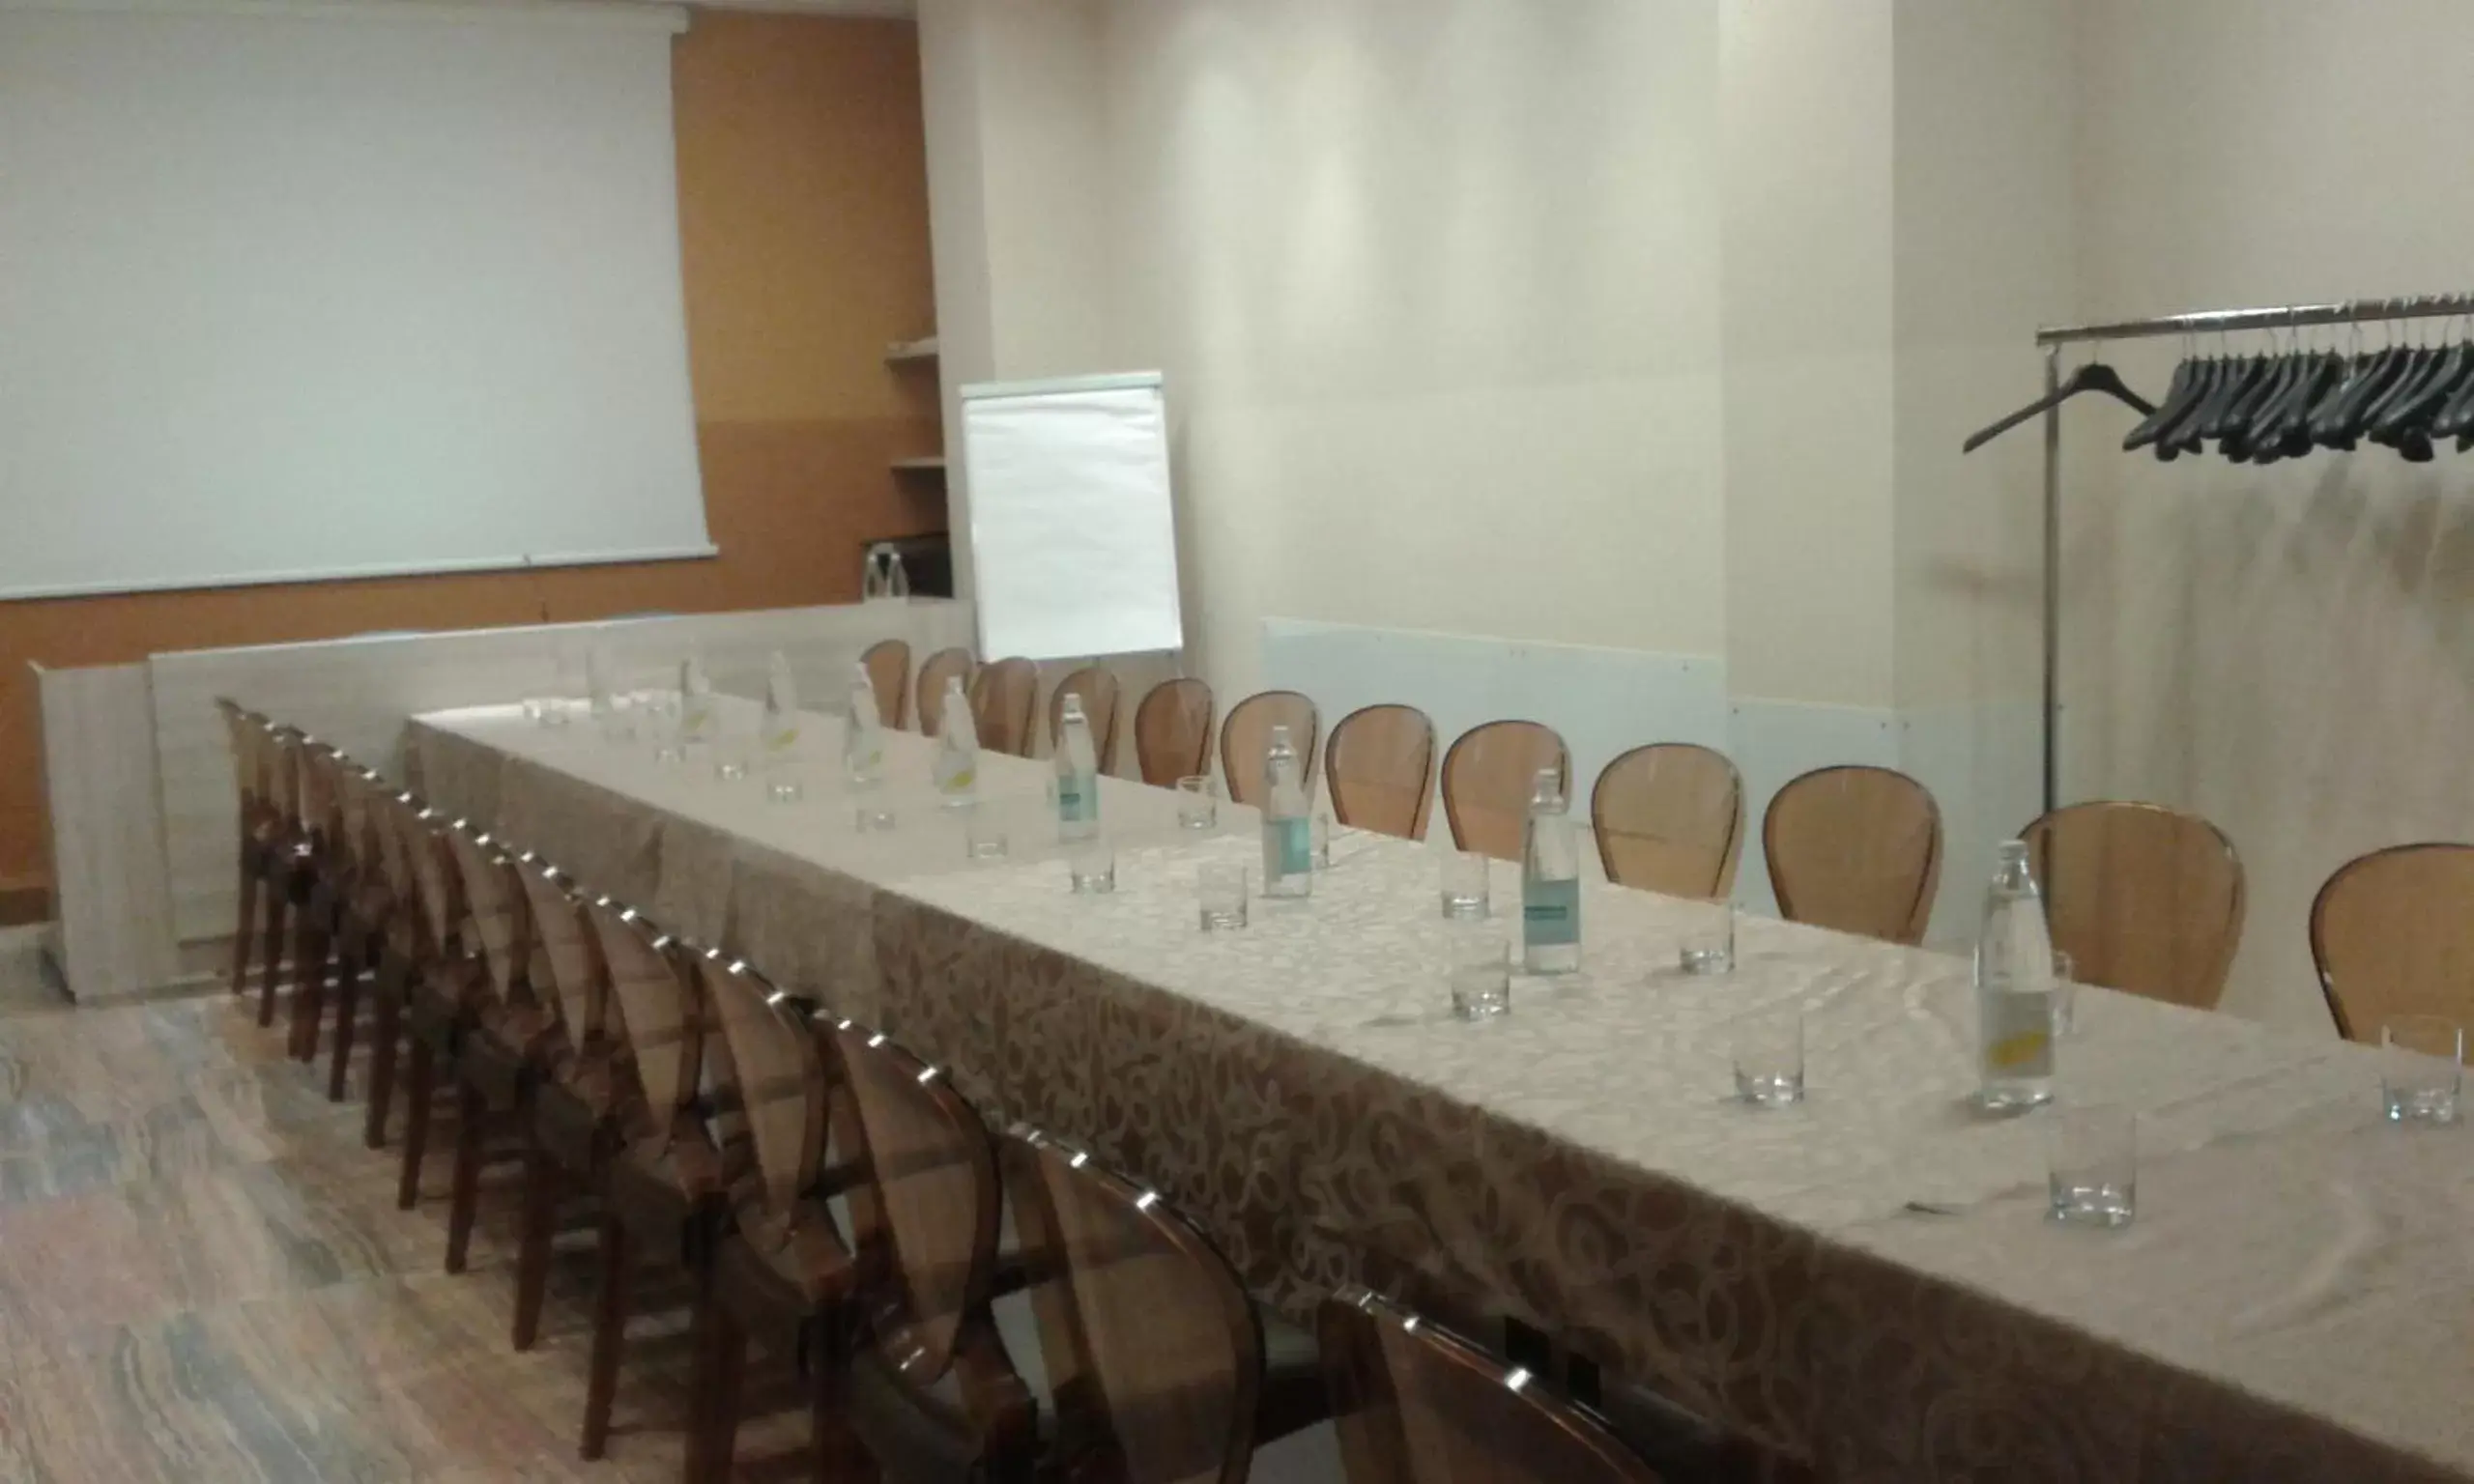 Meeting/conference room in Grand Hotel Forlì